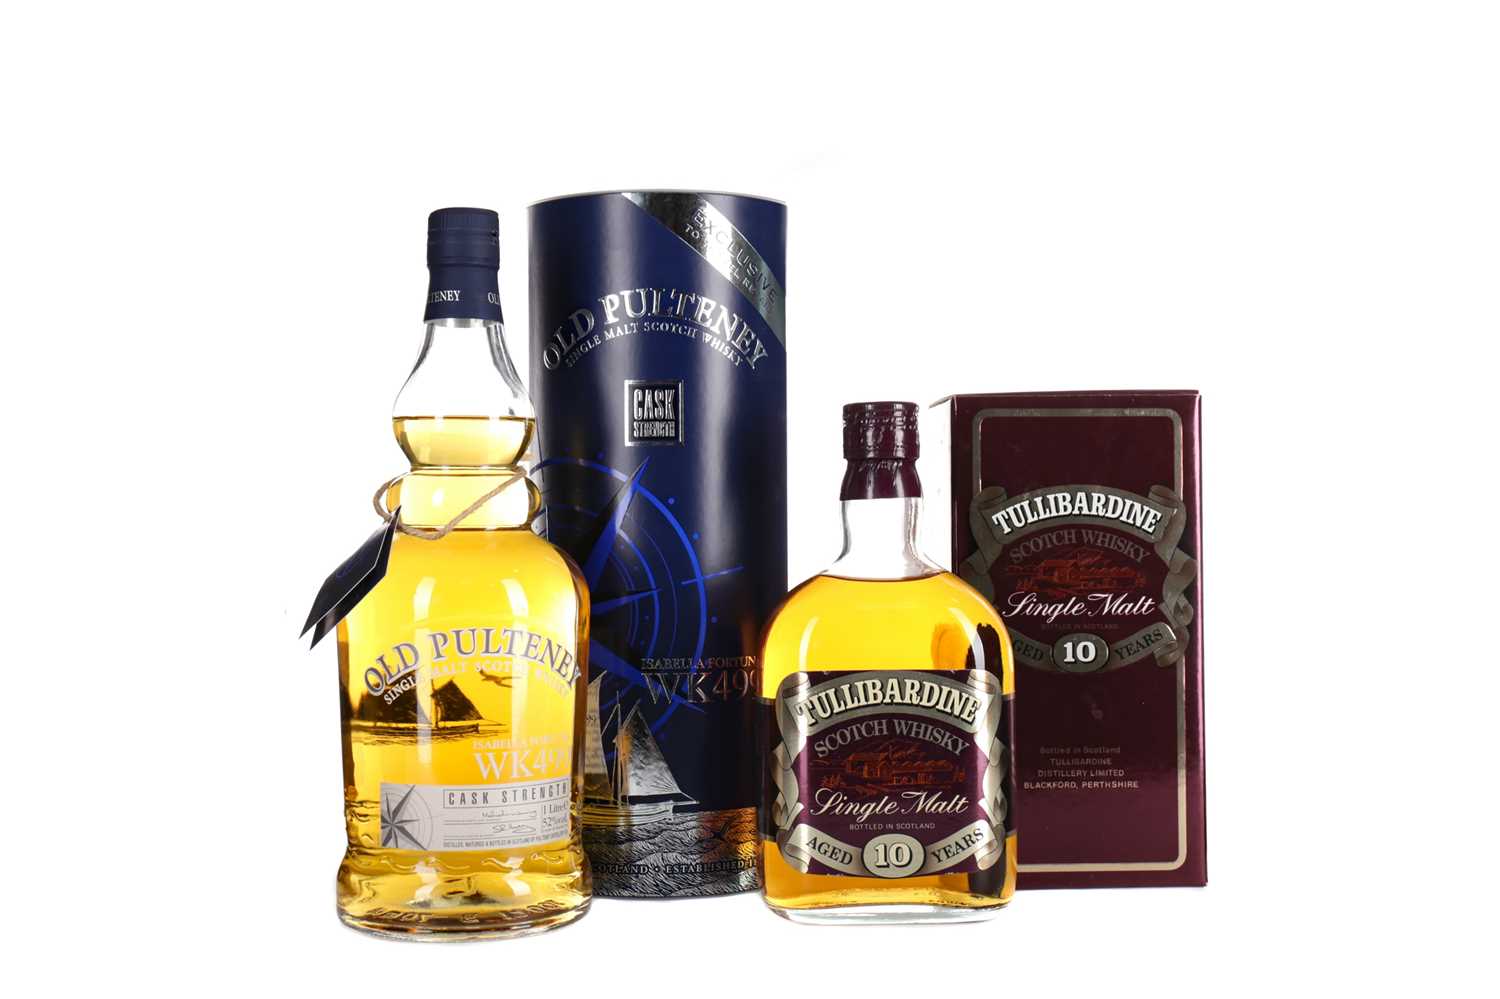 Lot 259 - OLD PULTENEY ISABELLA FORTUNA WK499 ONE LITRE AND TULLIBARDINE AGED 10 YEARS